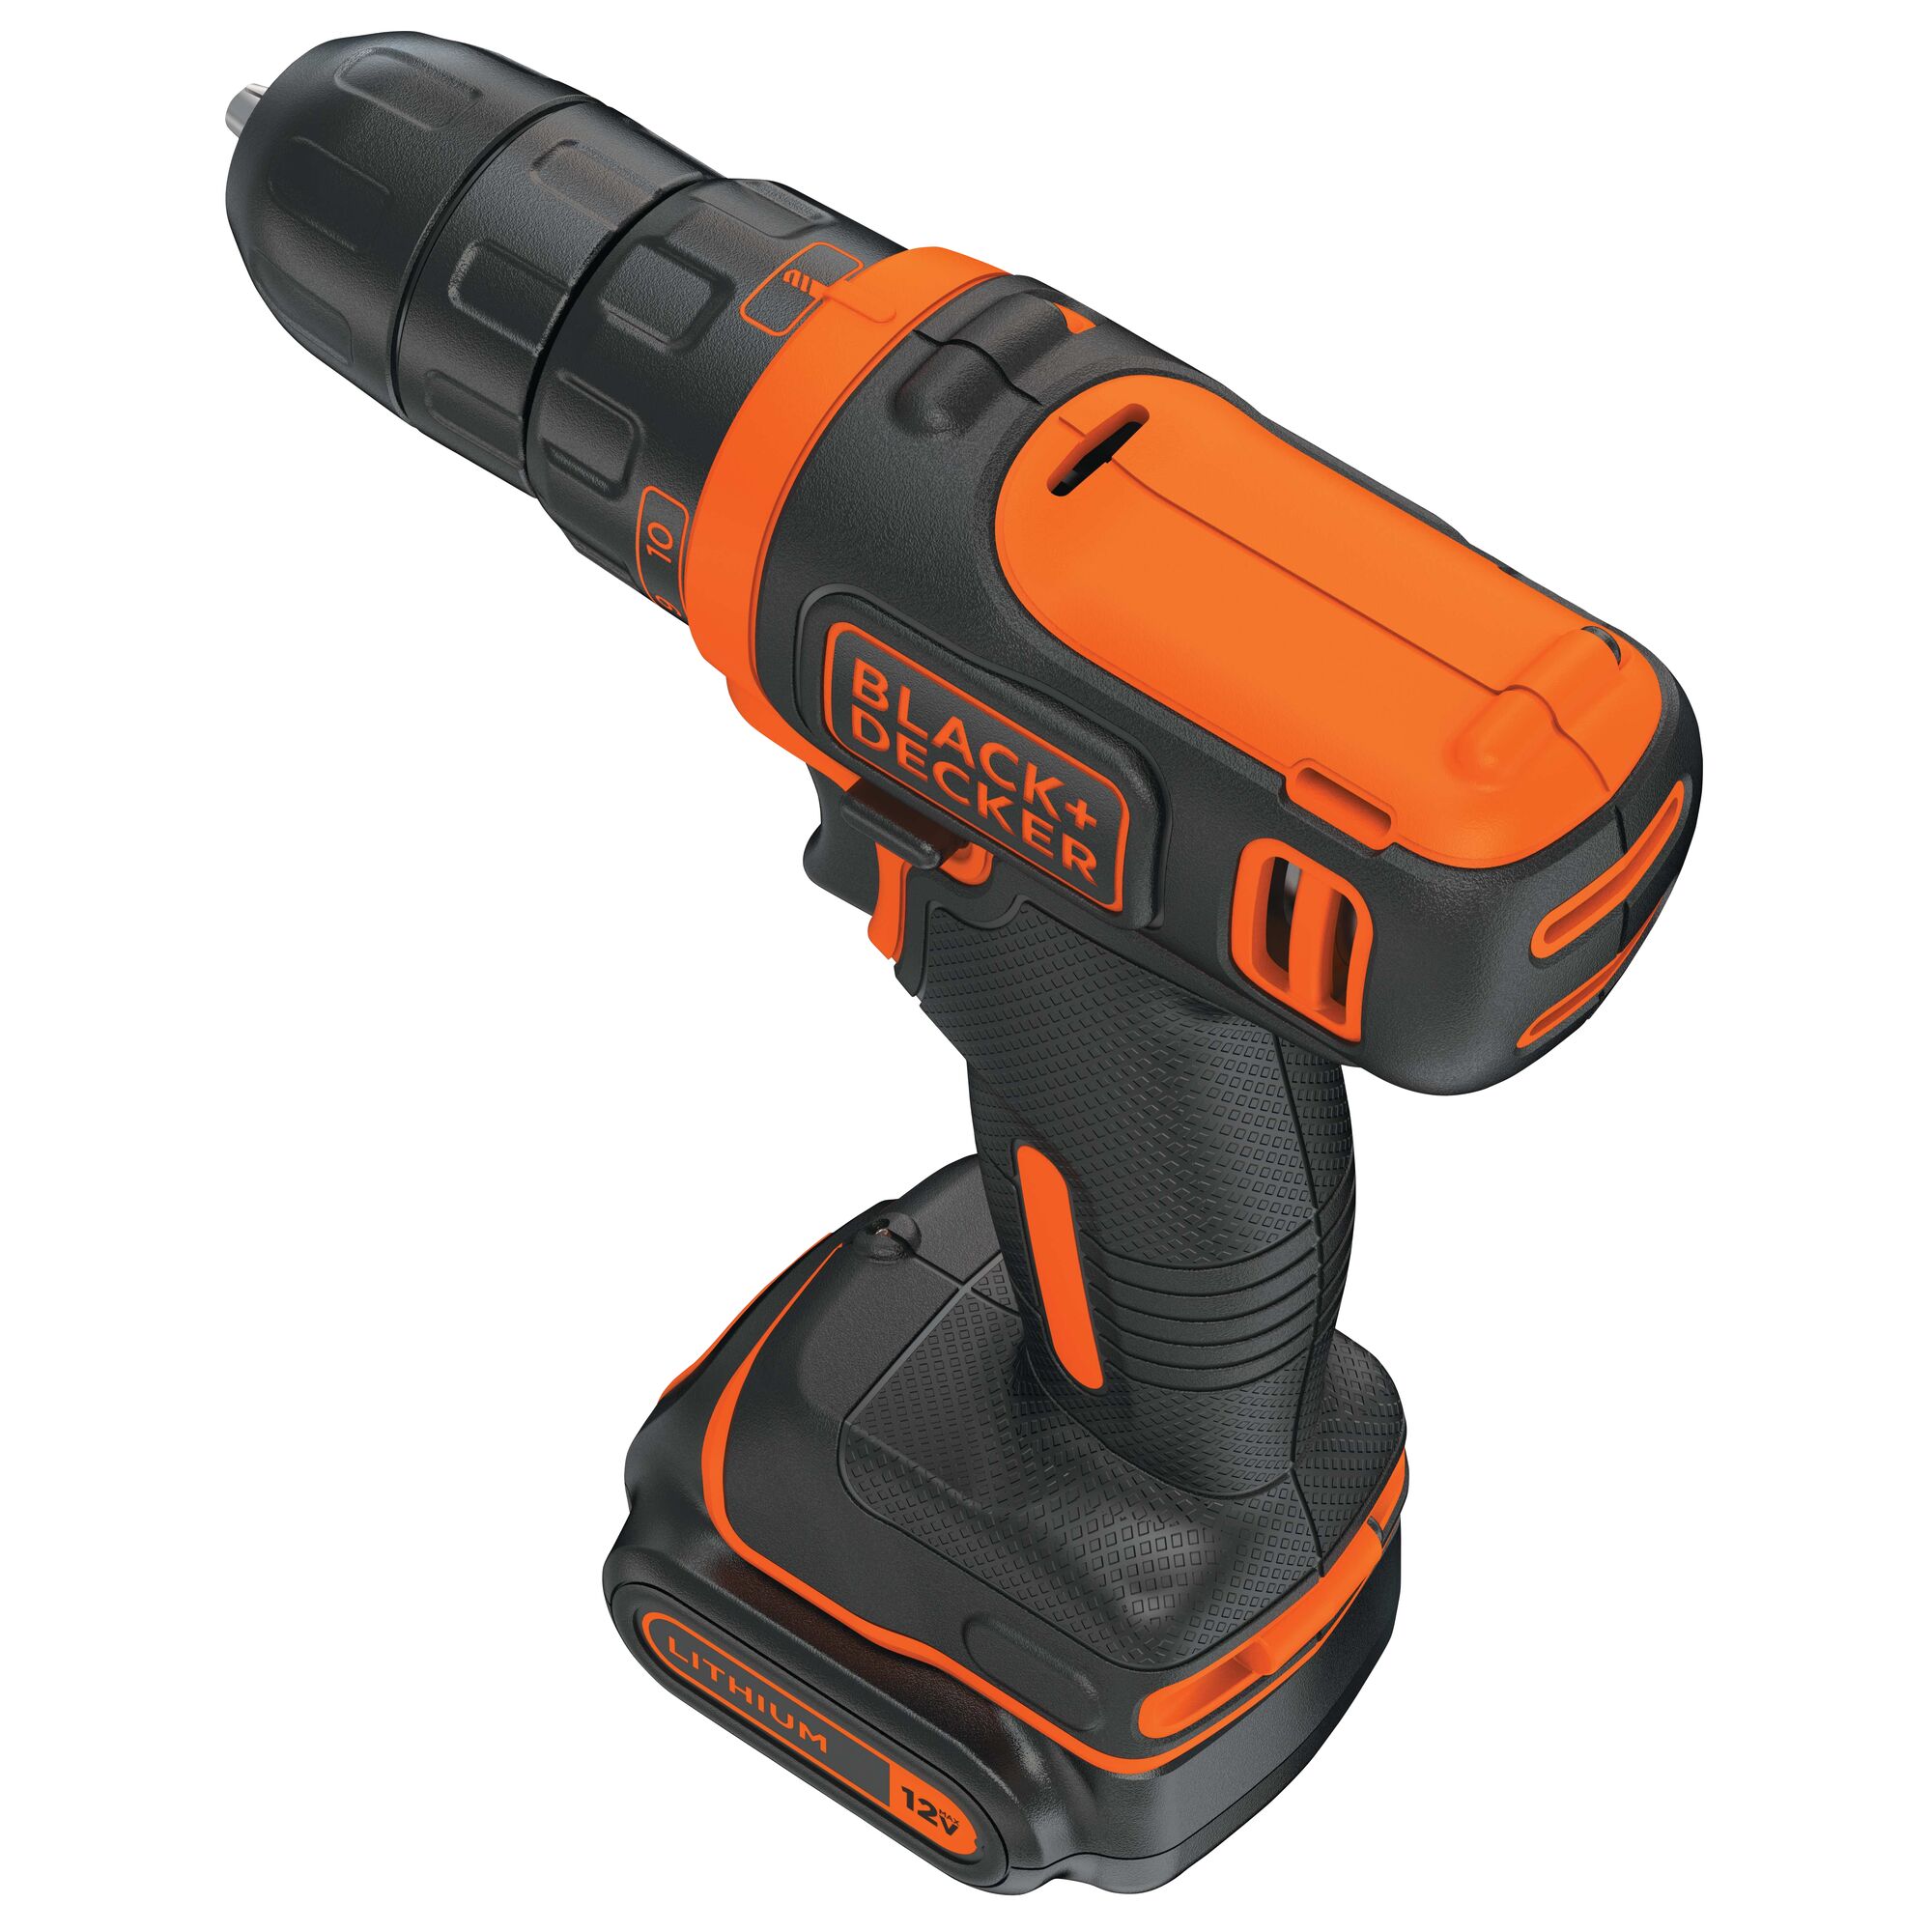 Profile of 12 volt cordless lithium drill or driver.